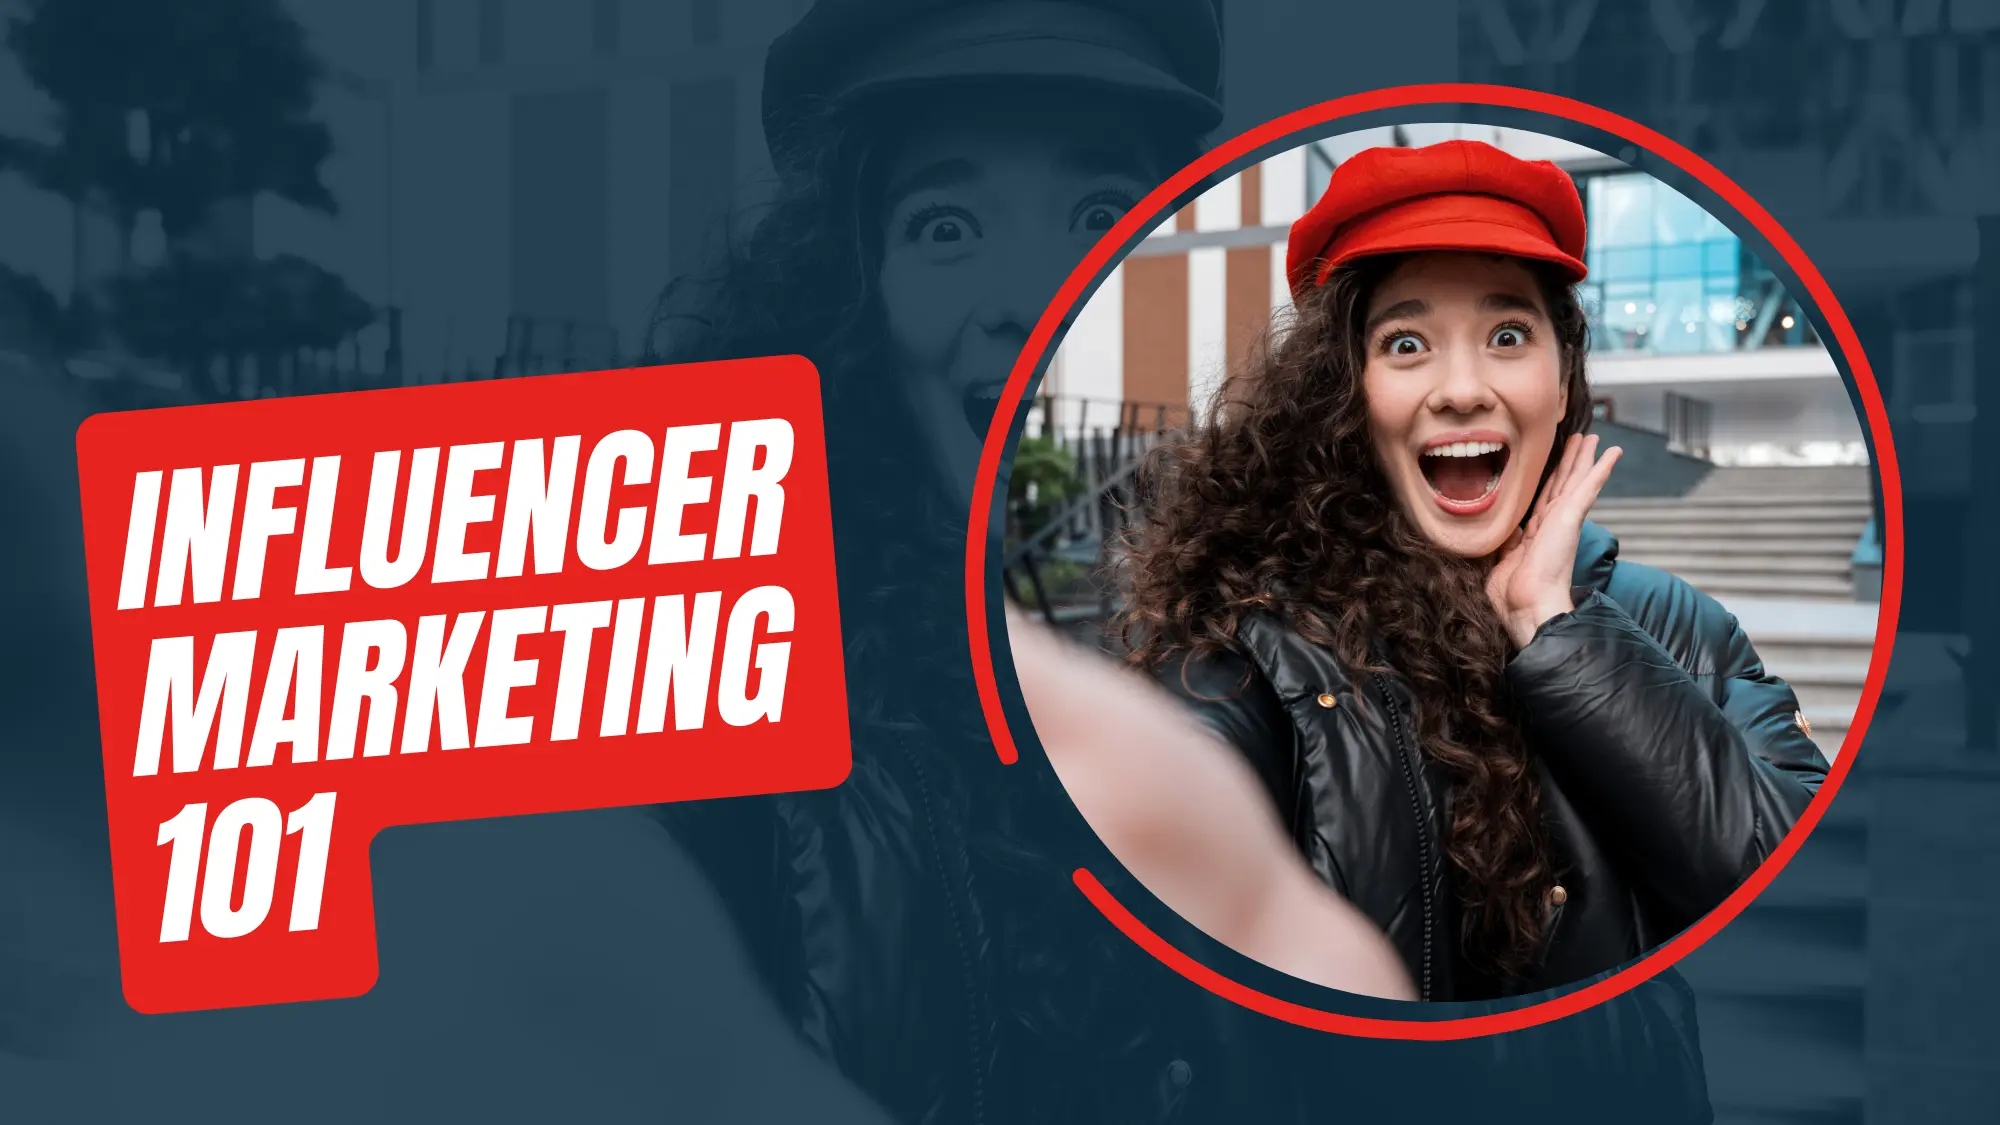 Influencer Marketing 101: How to Choose the Right Influencers for Your Brand